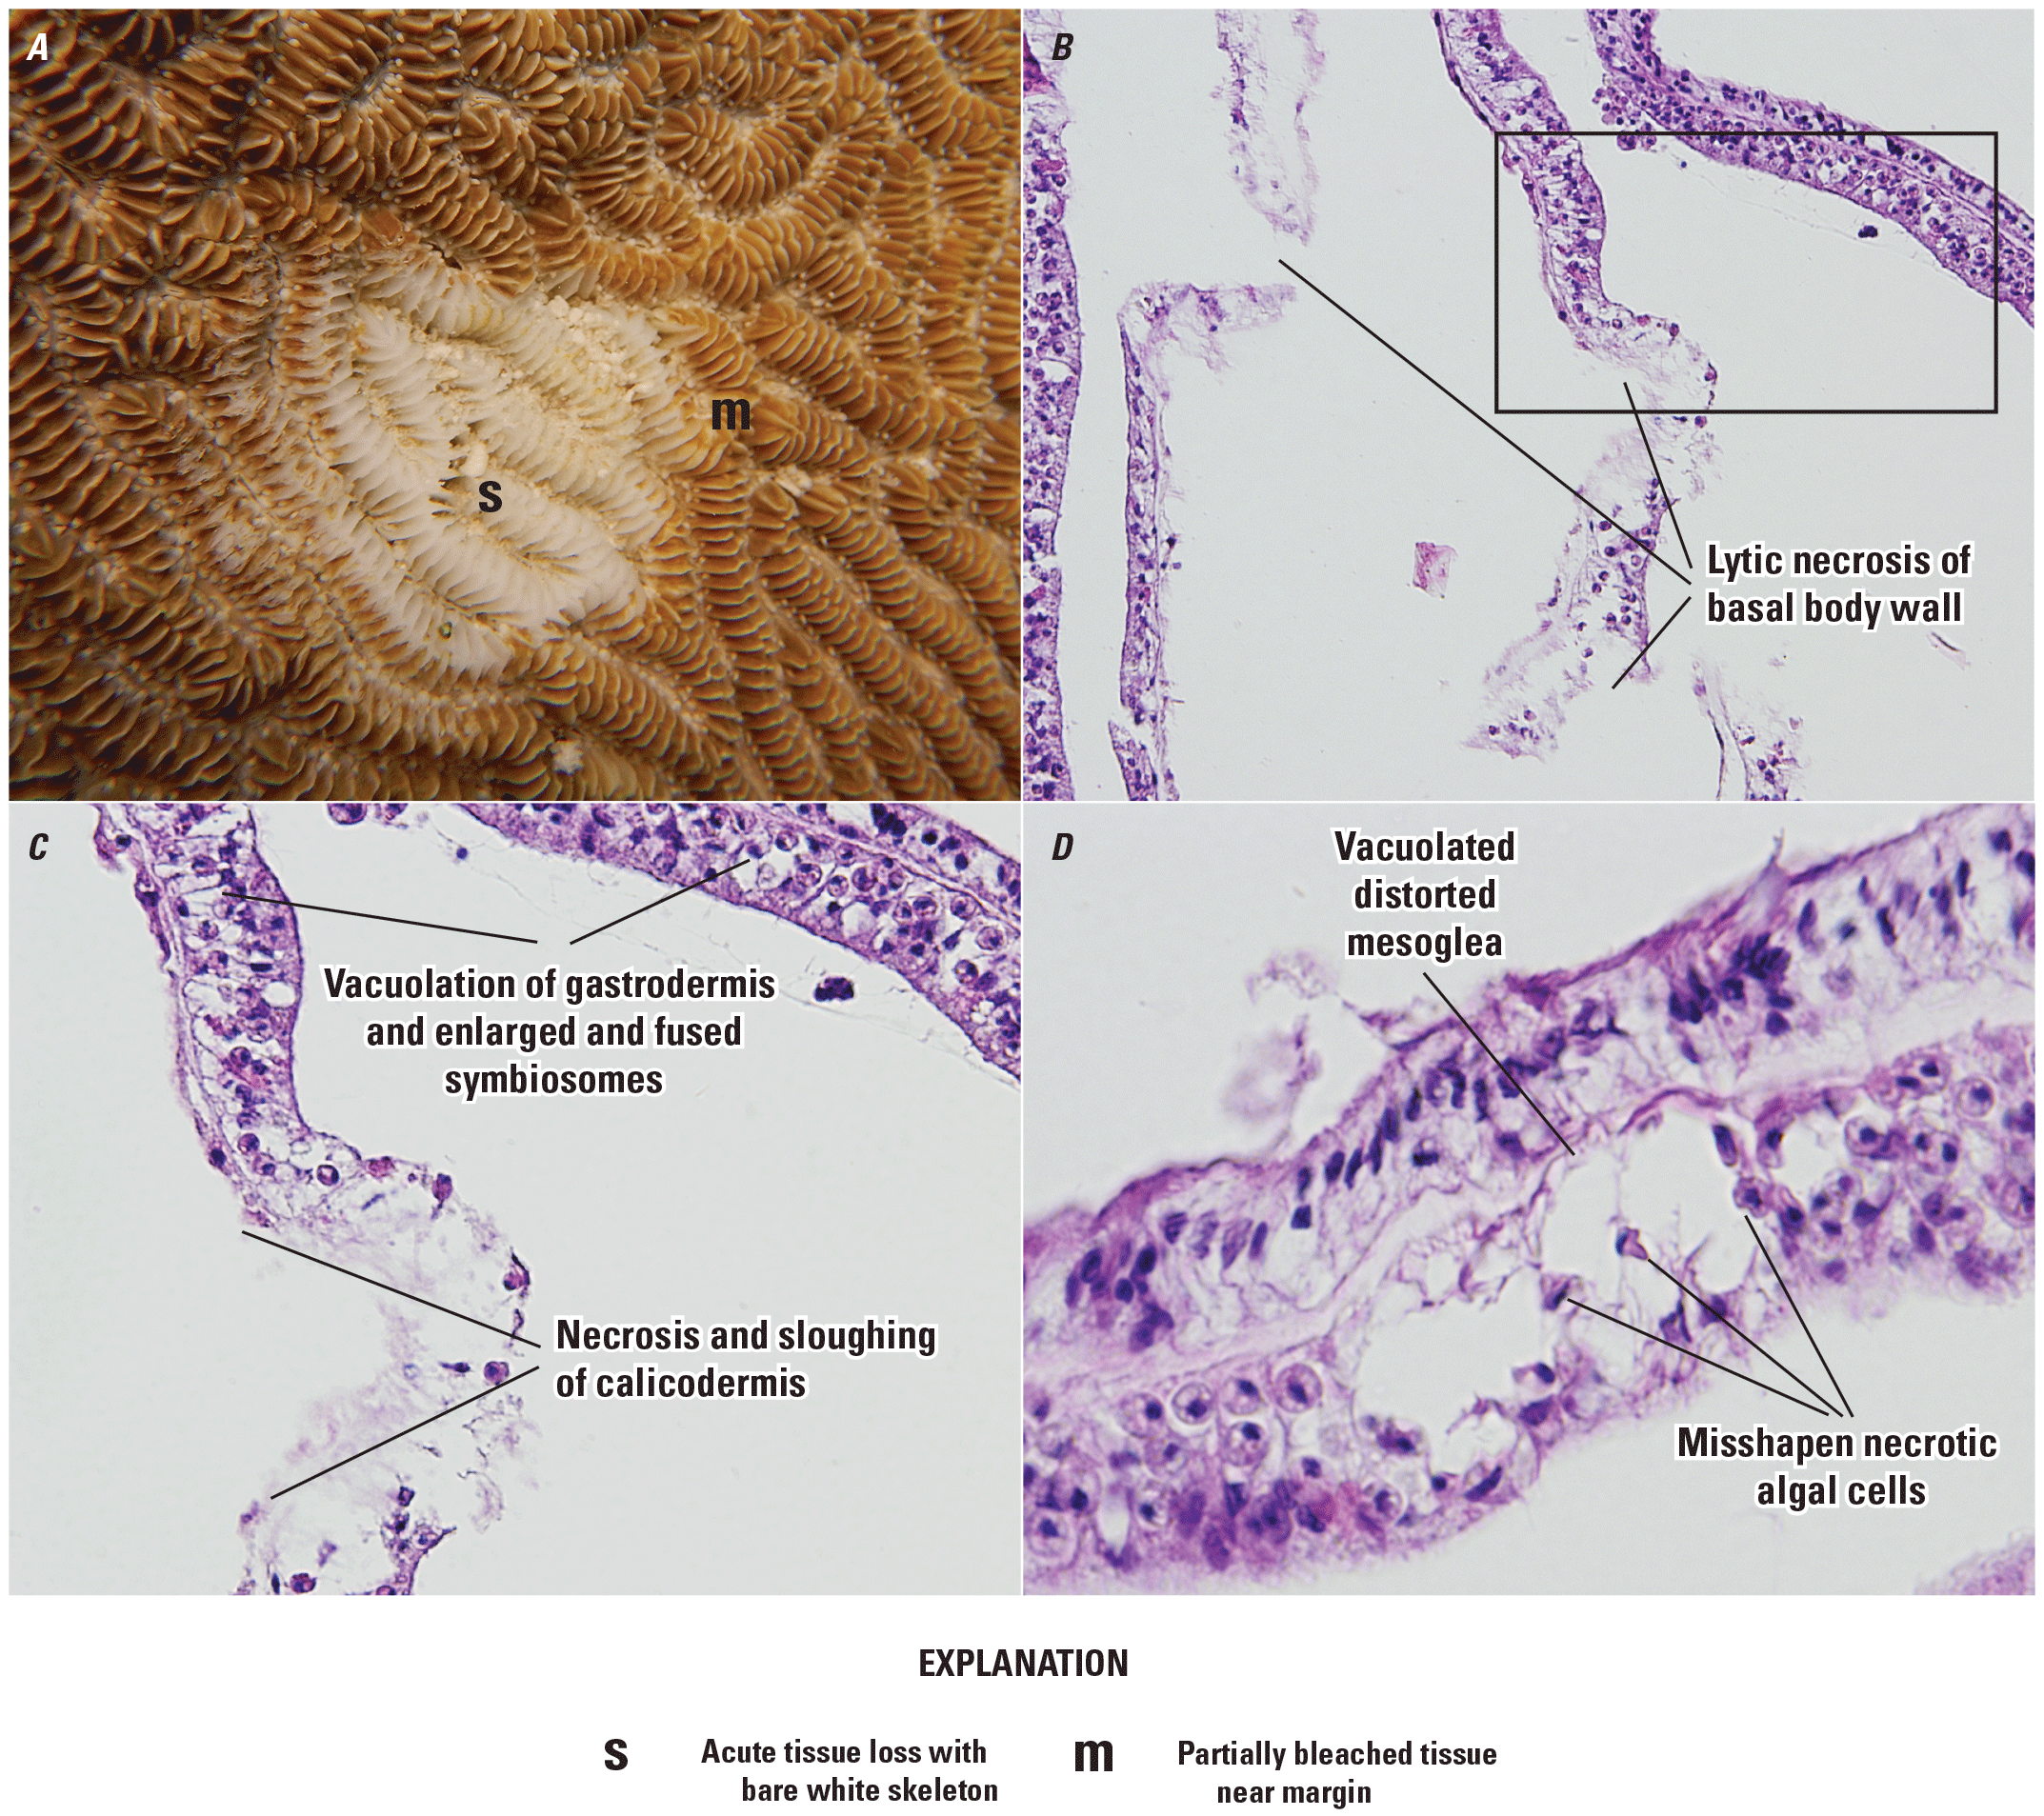 Lesions shown greatly vary in size.